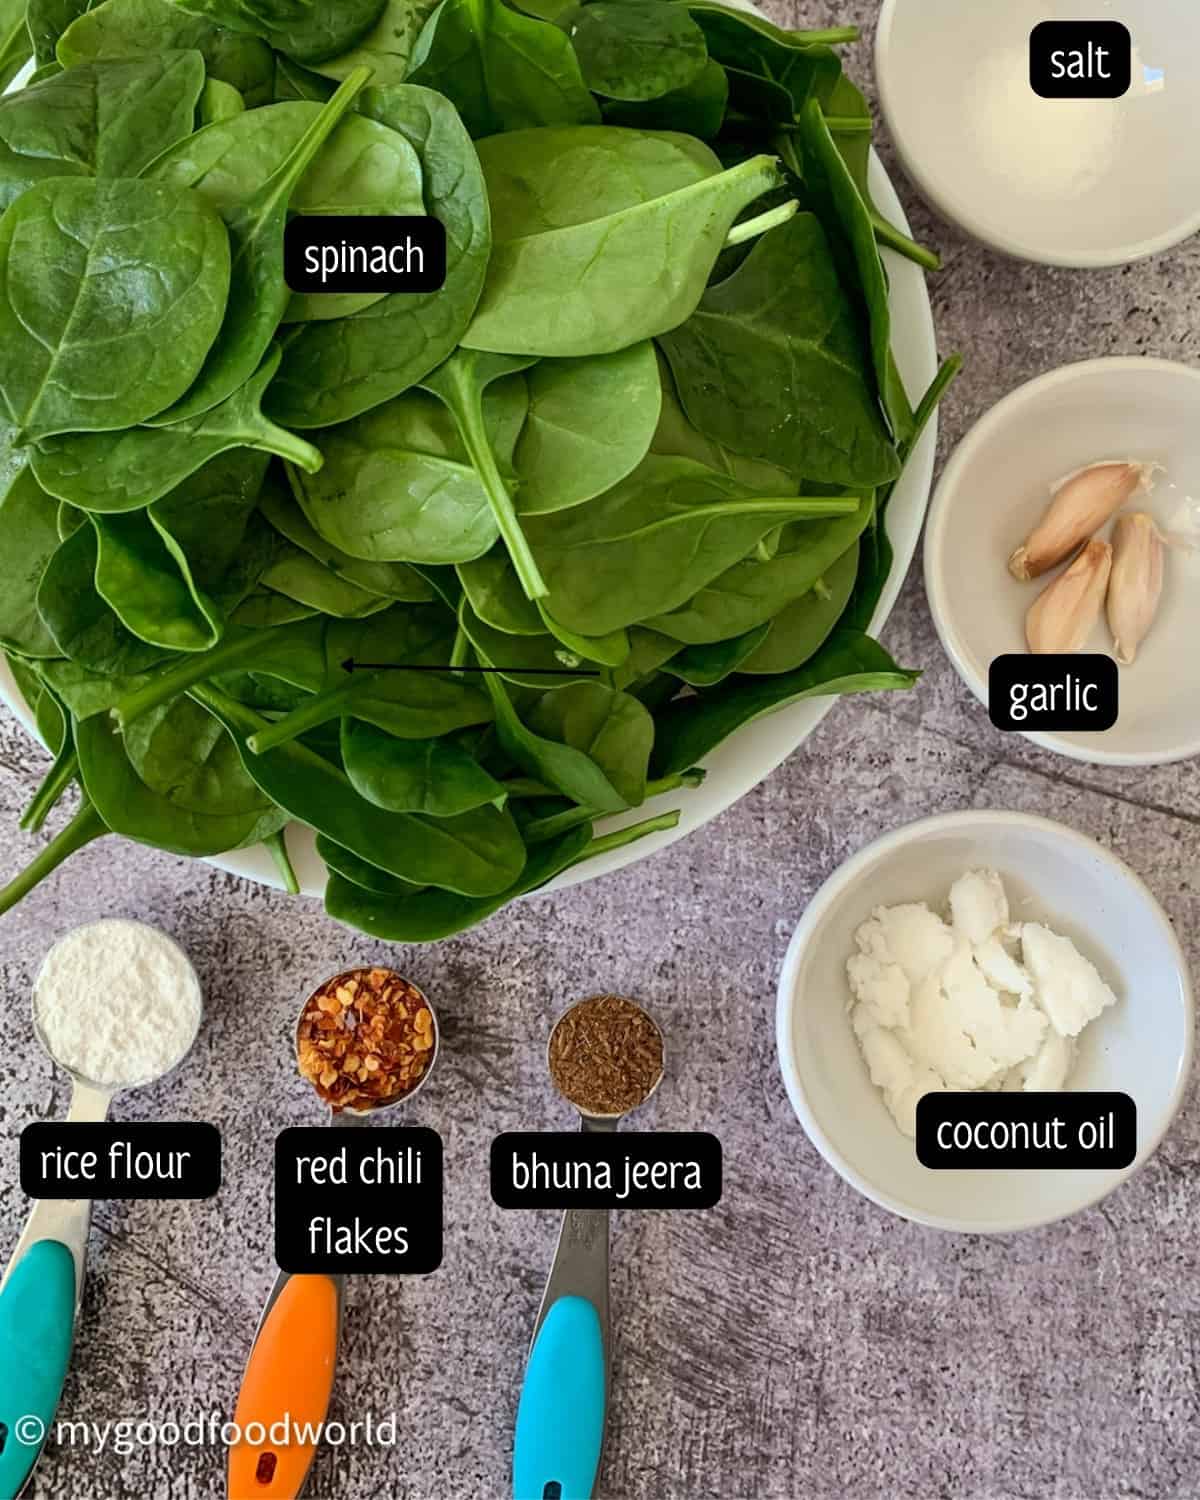 Ingredients for spinach stir fry placed in small white bowls and measuring spoons which are placed on a light grey background.